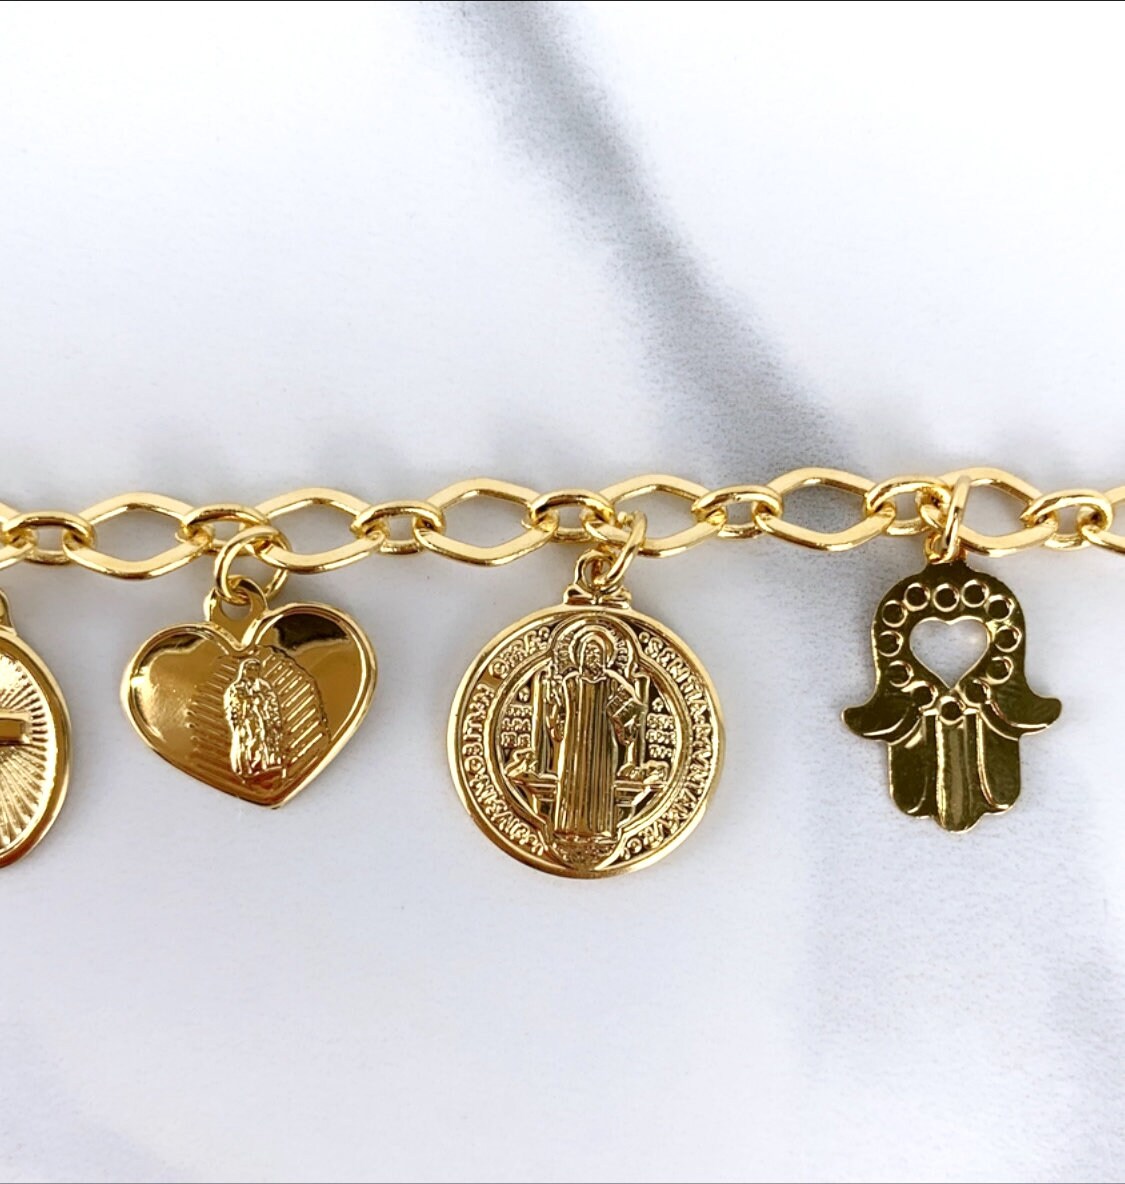 18k Gold Filled Fancy Religious & Lucky Peace and Love, Star, Tree, Cross, Hamsa Hand Charms, Bracelet Wholesale Jewelry Making Supplies